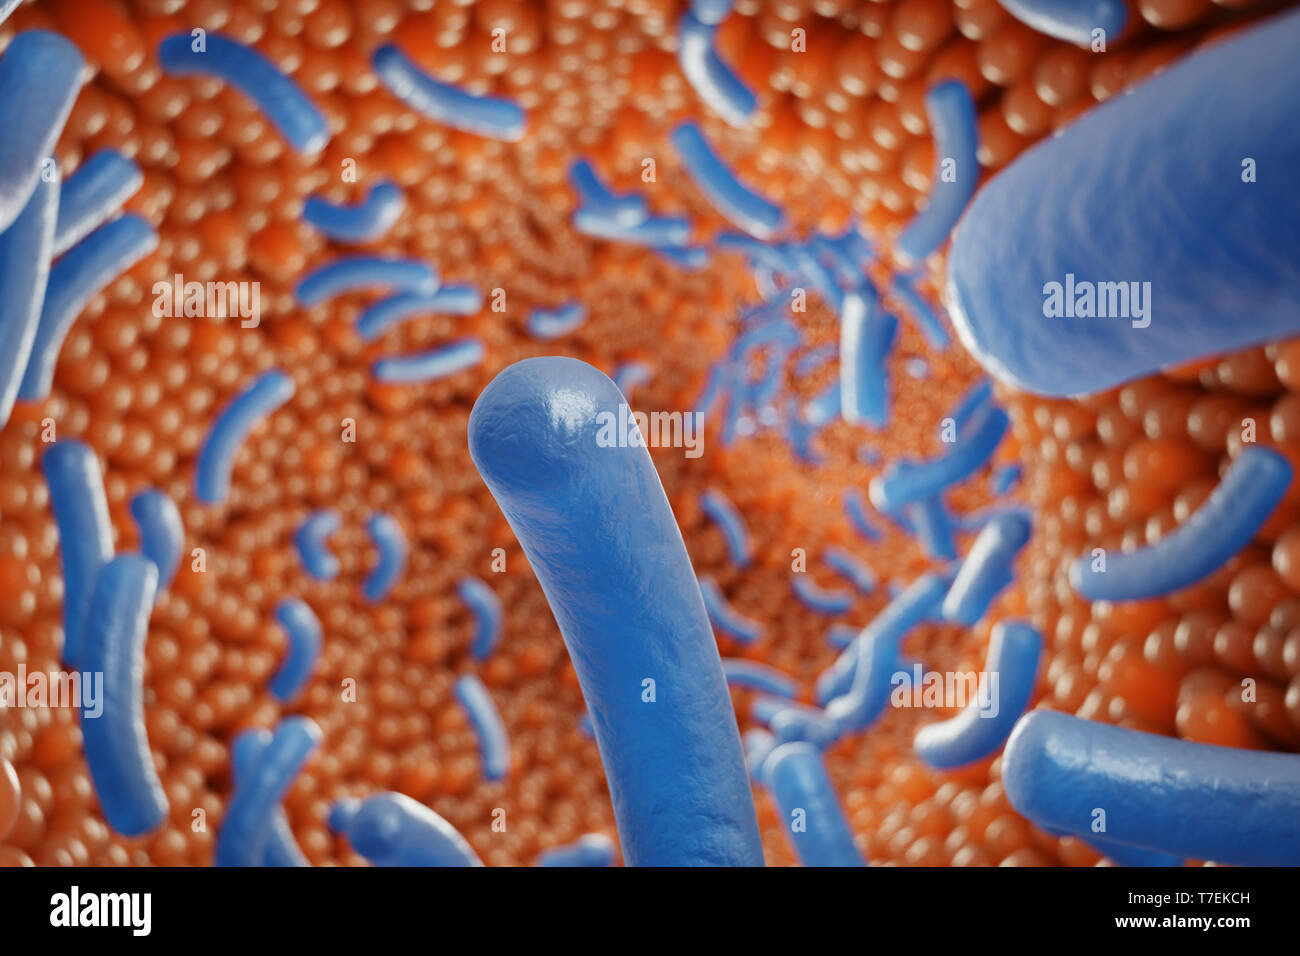 Intestinal villi. Intestine lining. Microscopic capillary. Human intestine. Concept of a healthy or diseased intestinal. Viruses or bacteria, cell inf Stock Photo